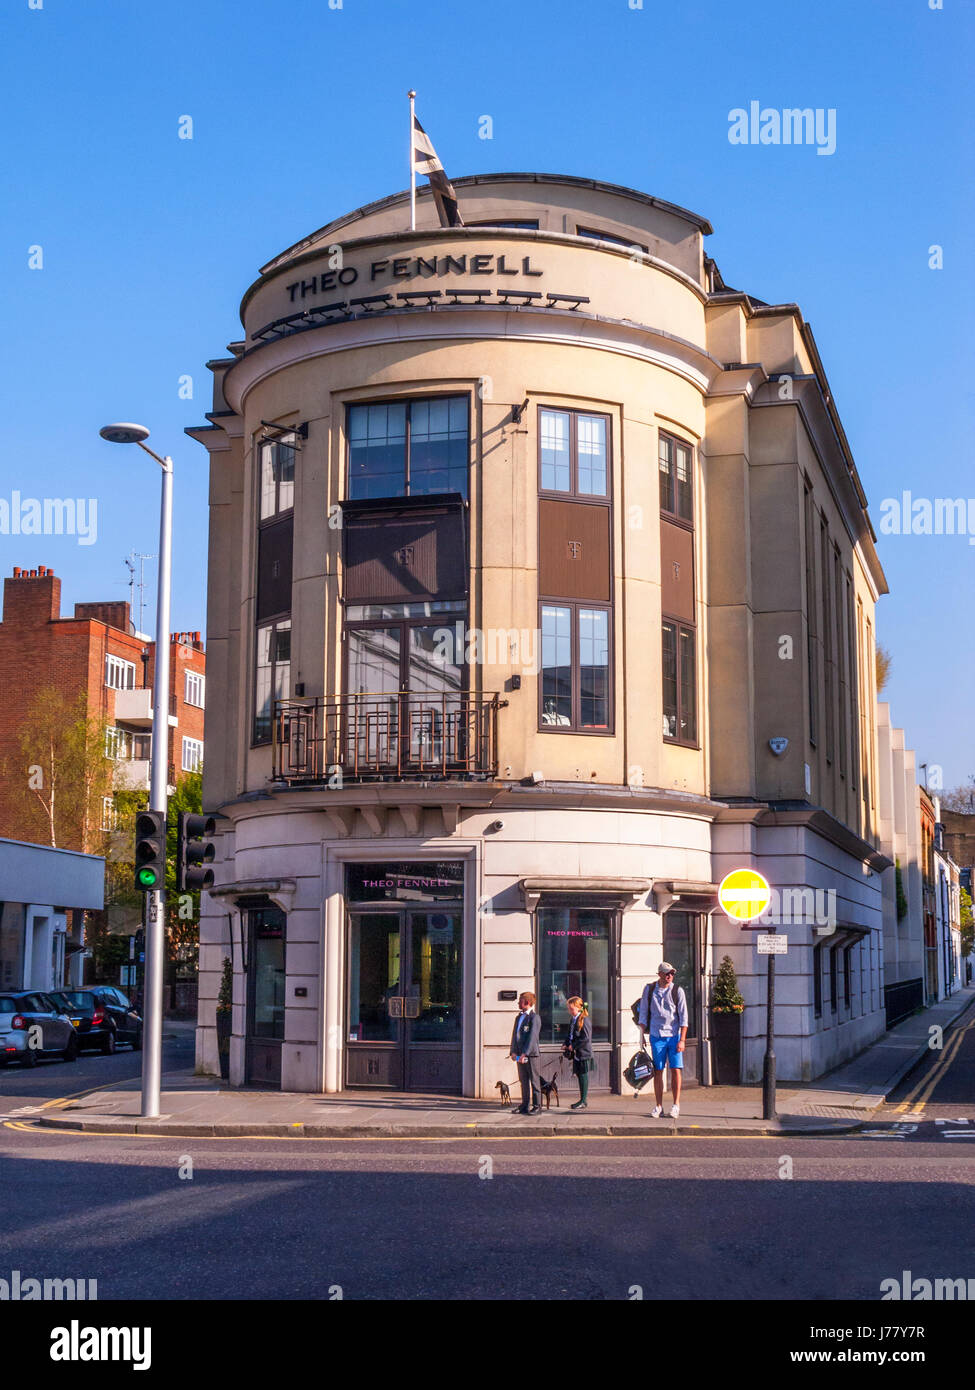 Theo Fennell, Fulham Road, Londra Foto Stock